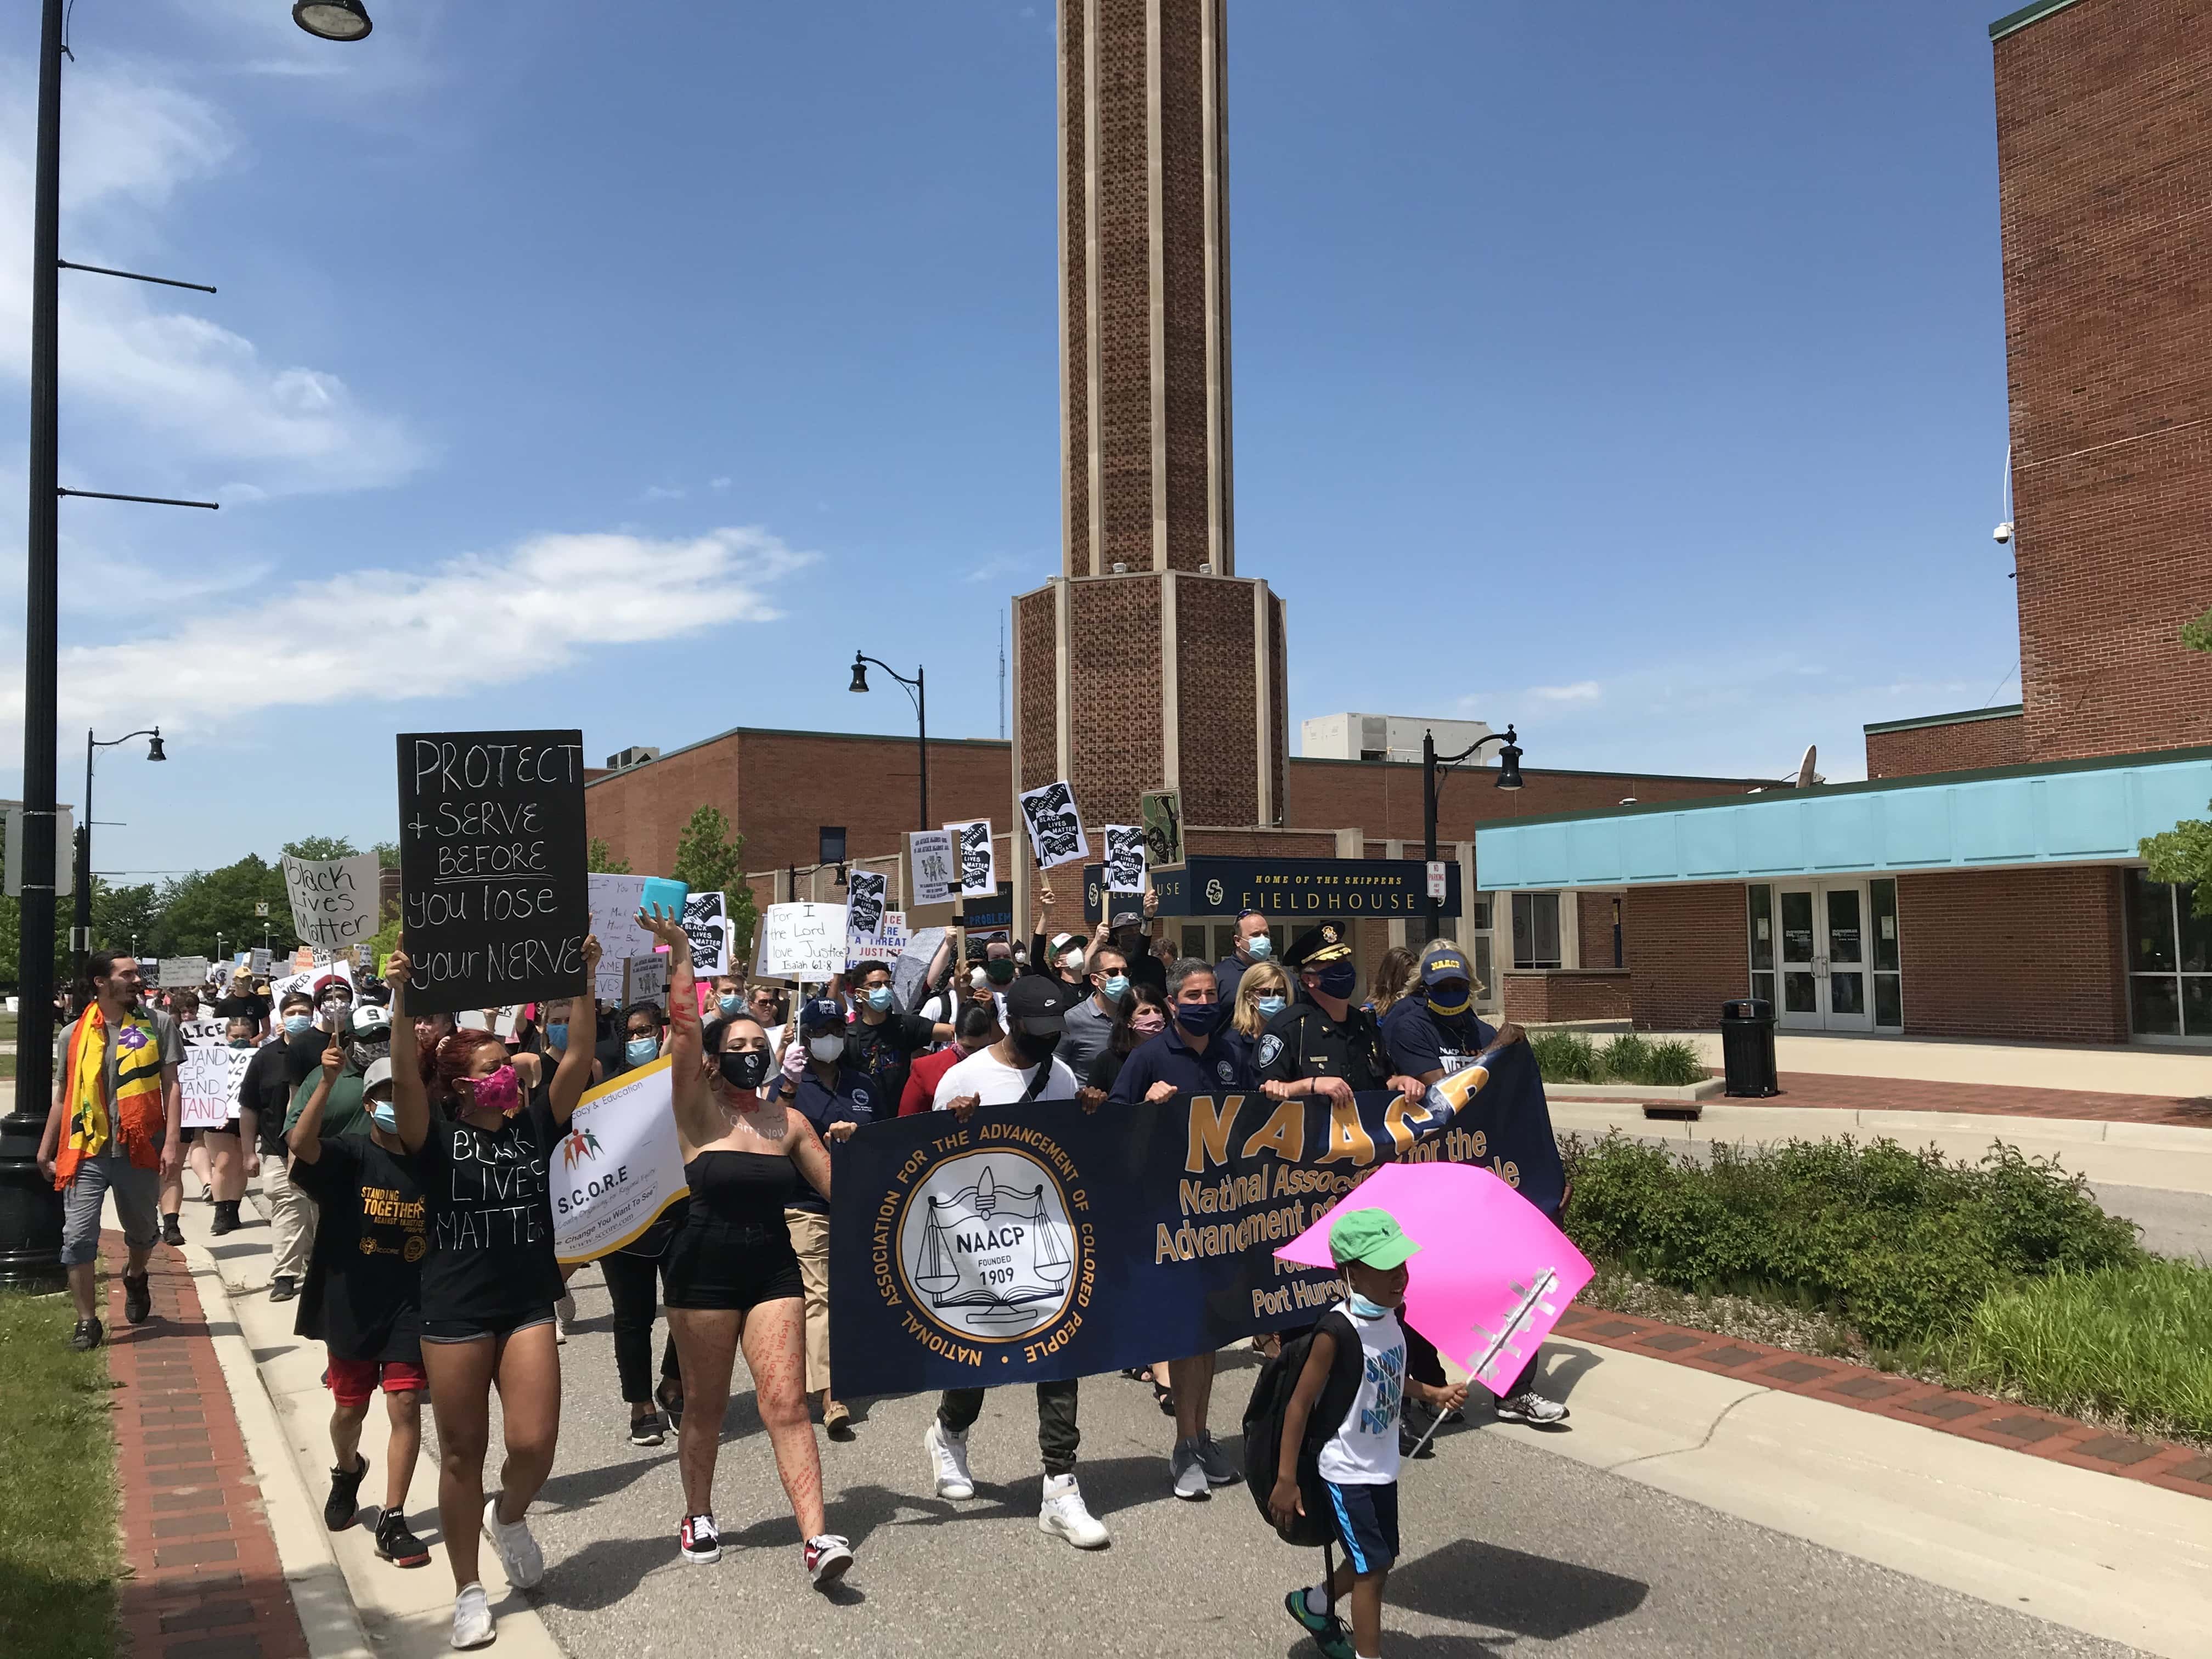 Protesters take to the streets in Port Huron, peacefully calling for